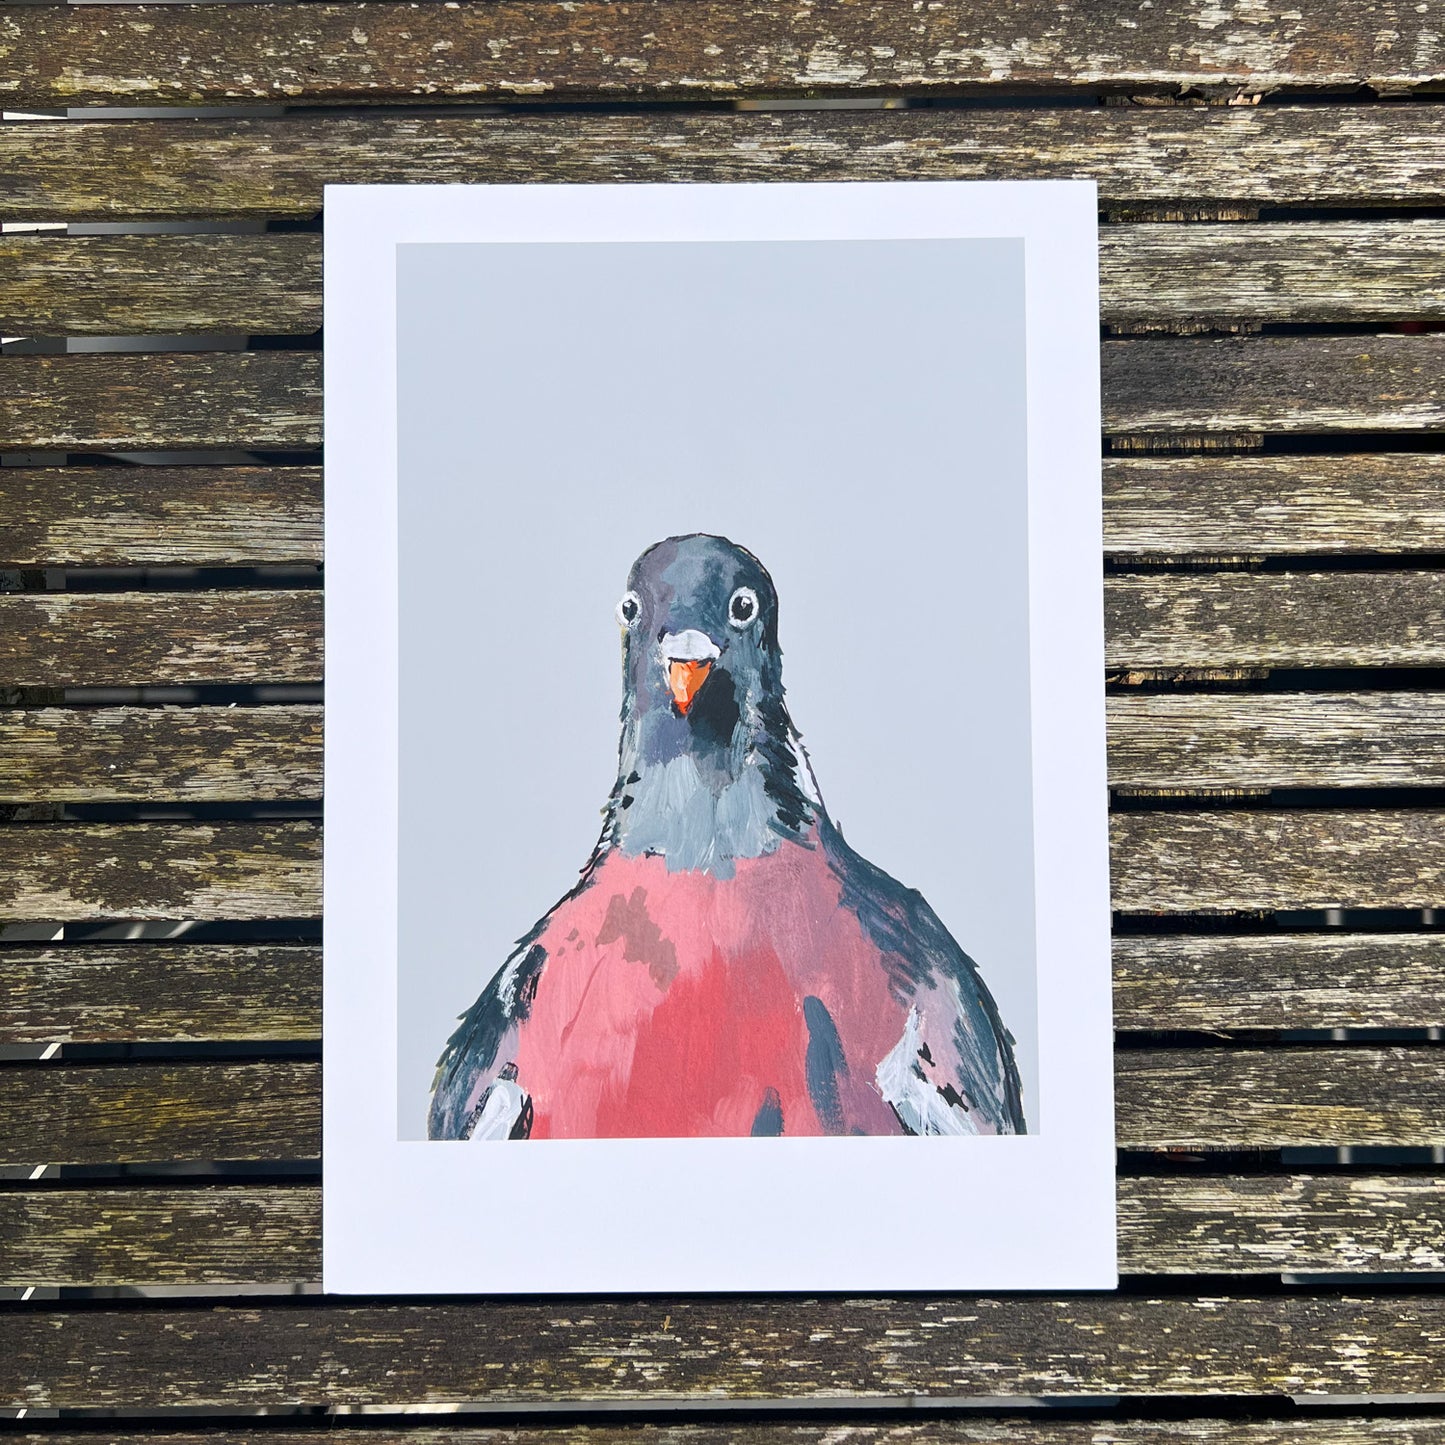 Print illustration of a pigeon photographed from above on a wooden table.